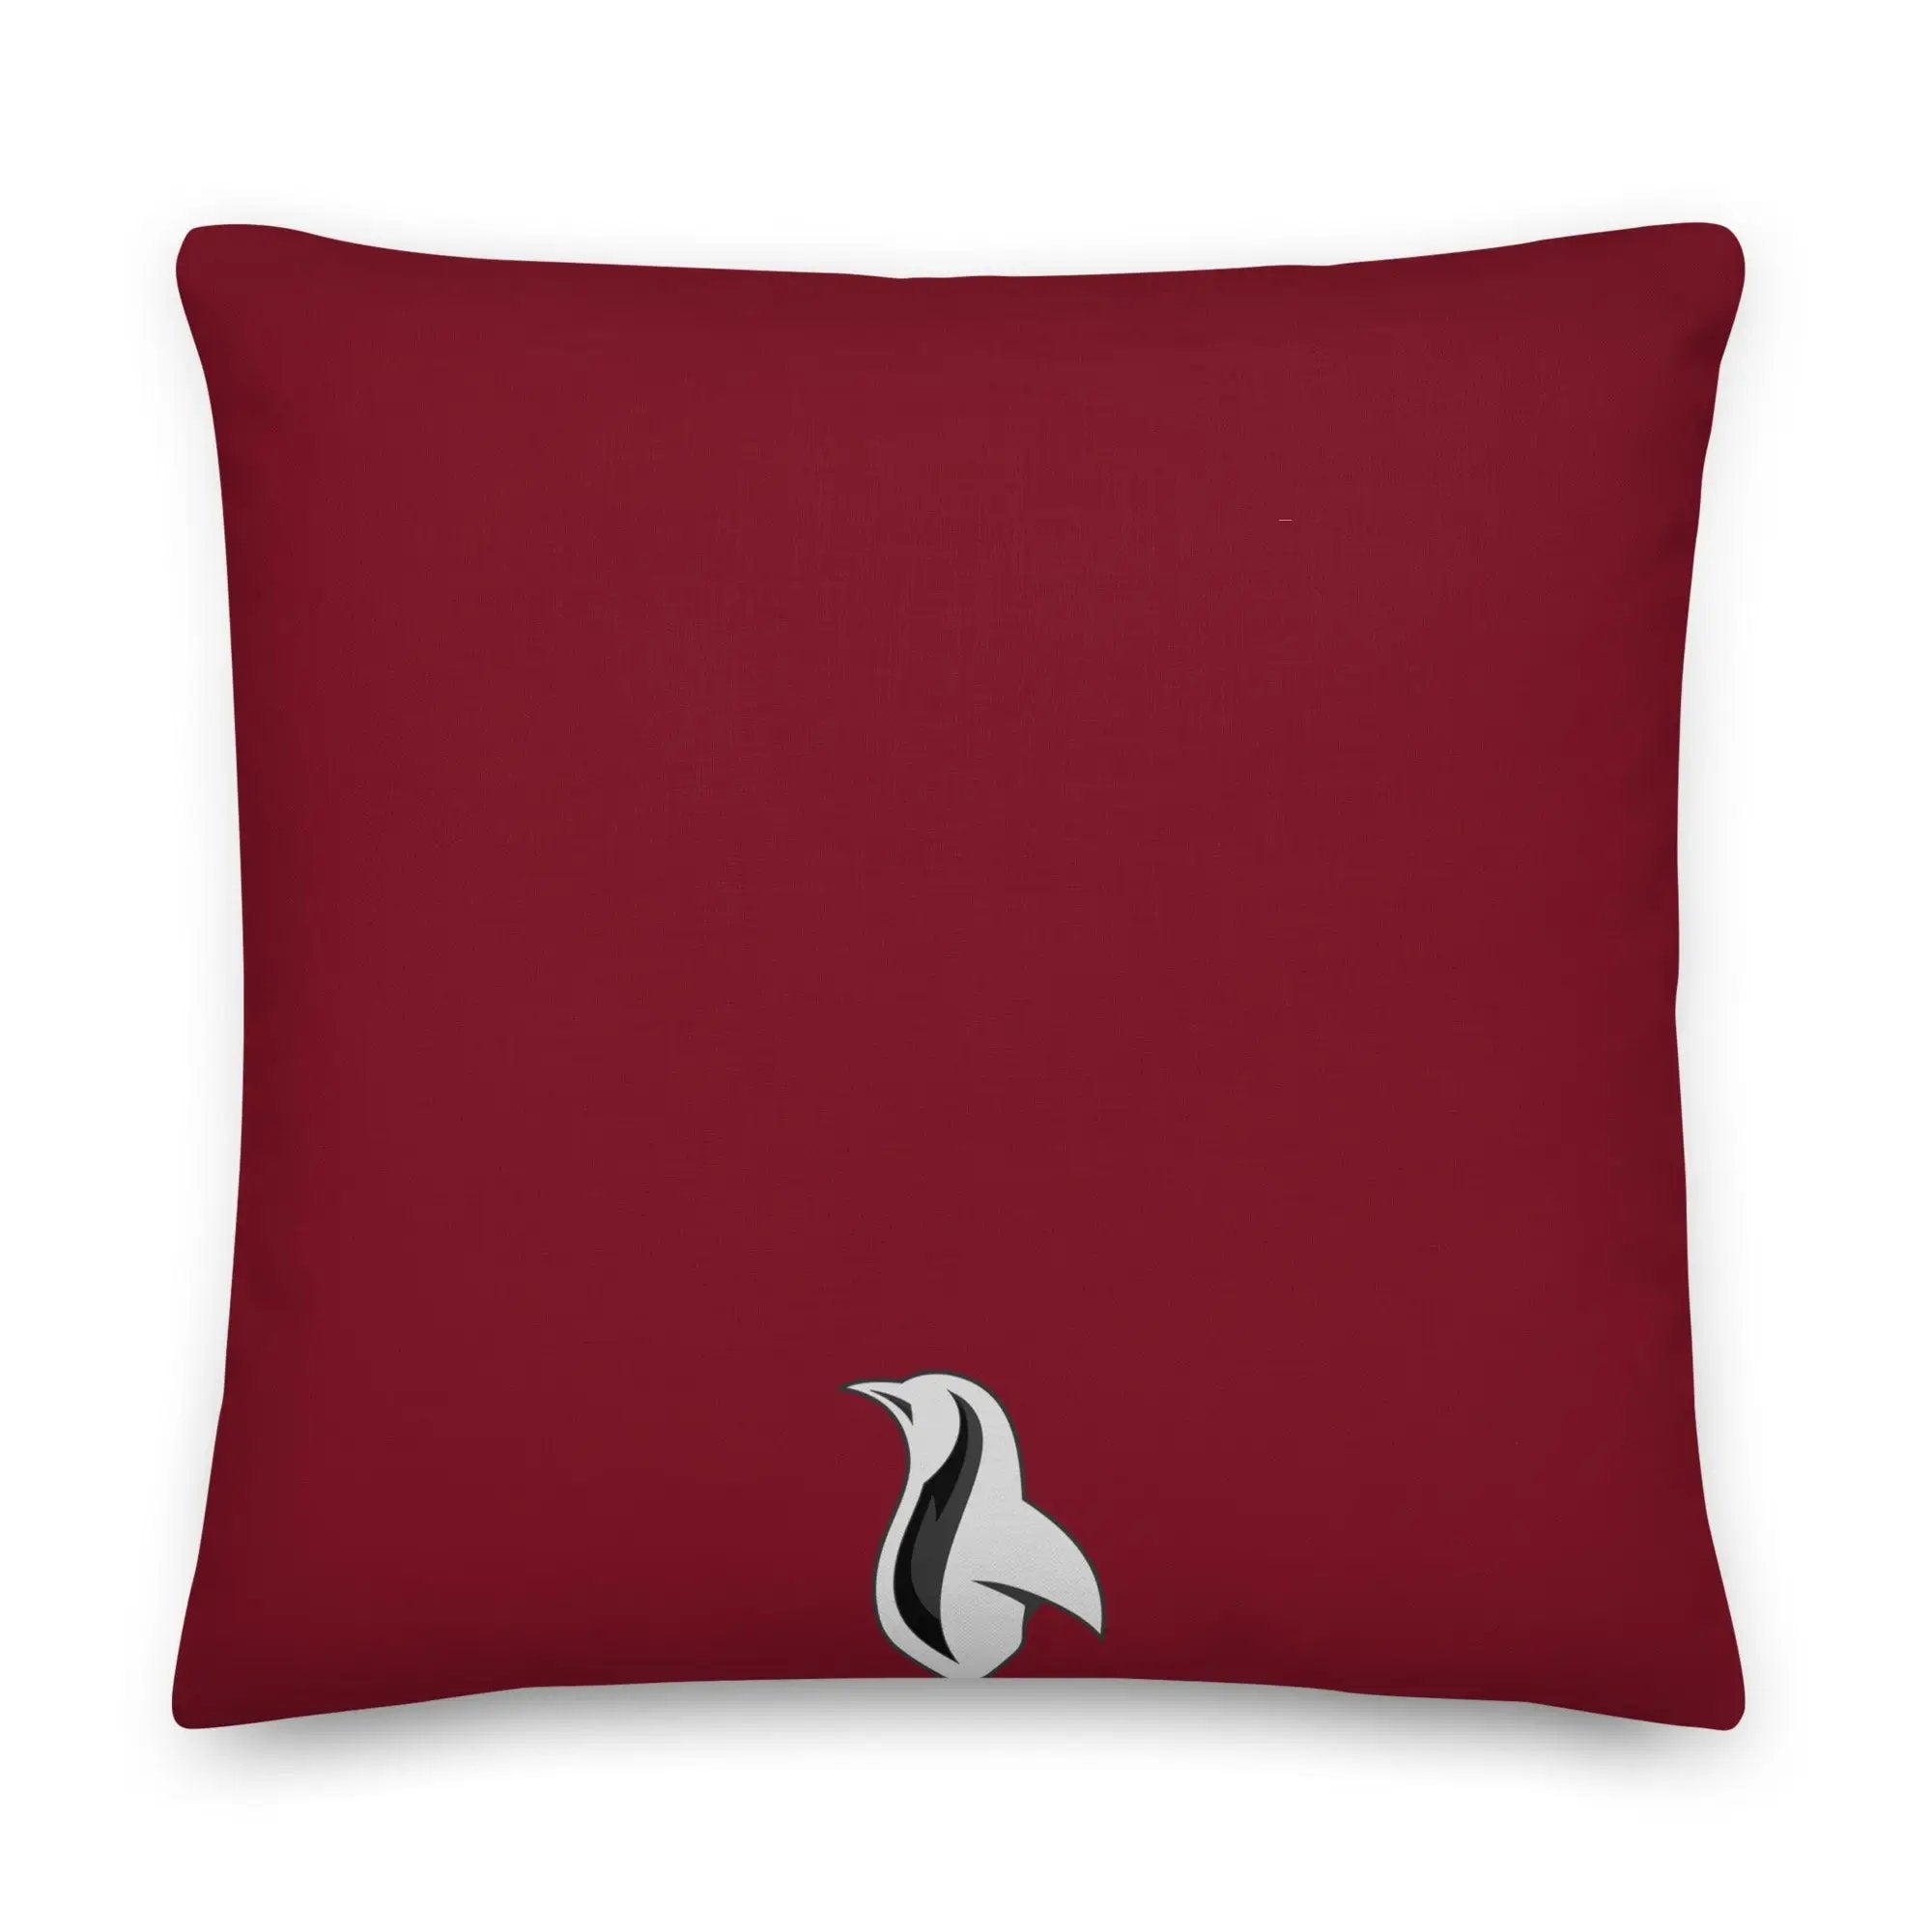 Red pillow with writing